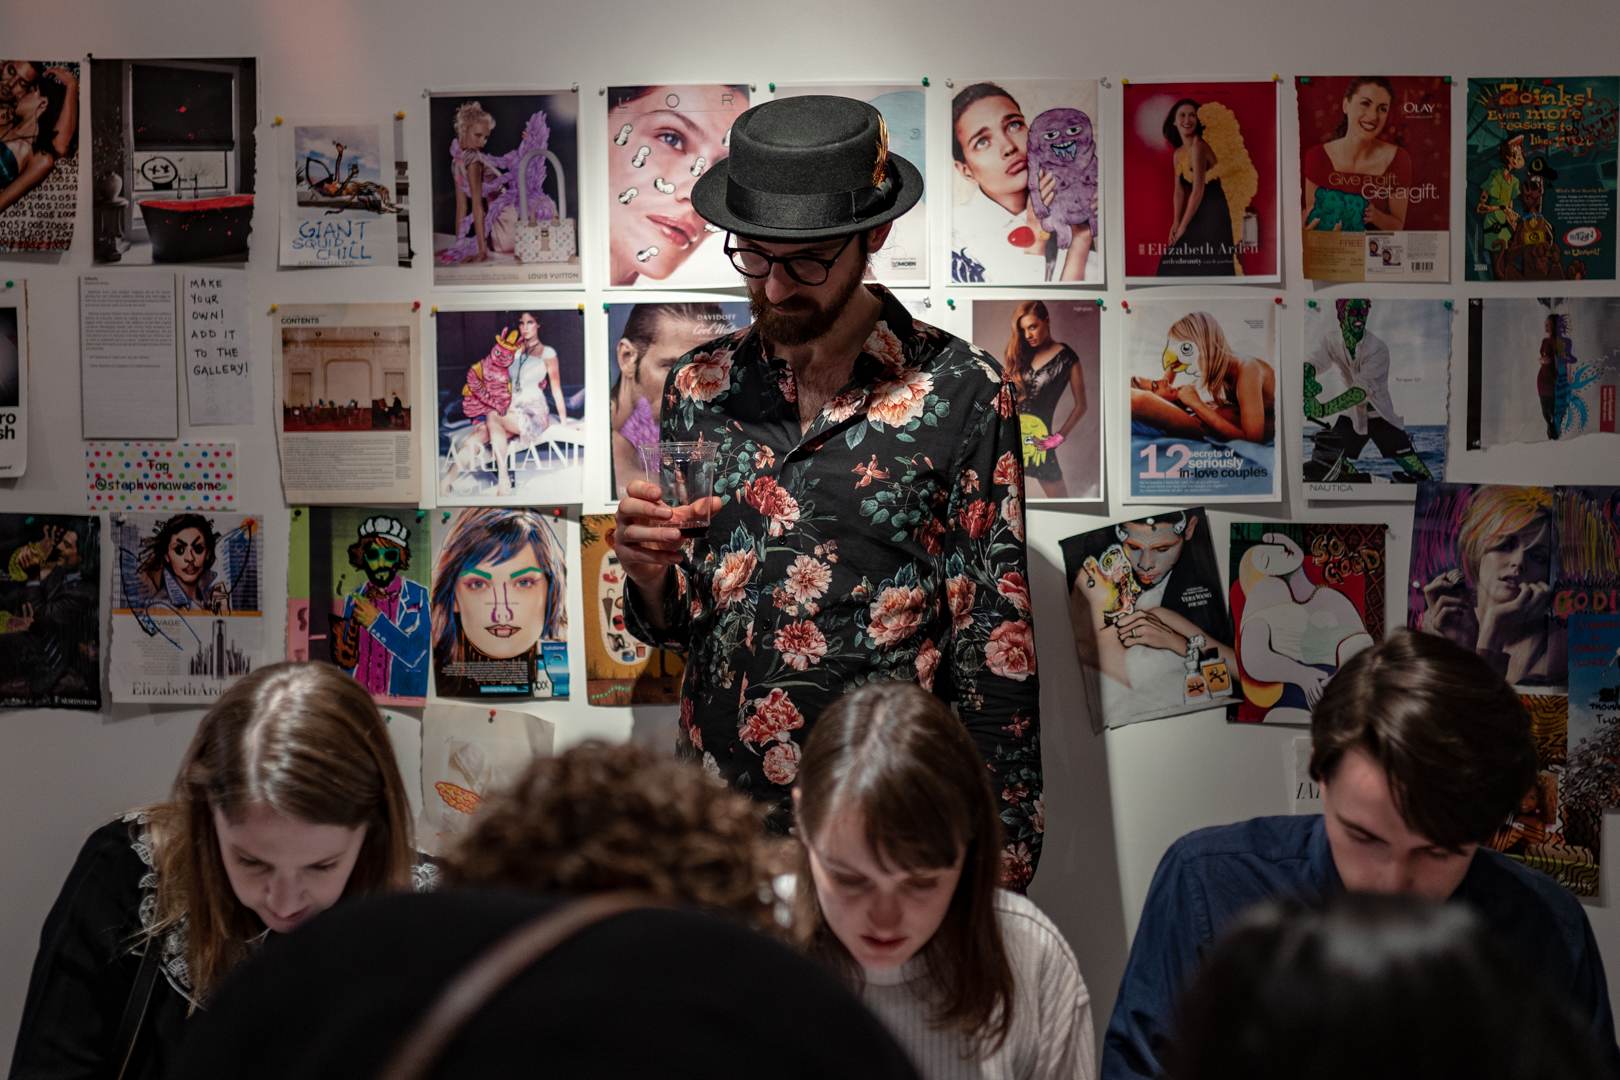 Adhacks by Stephanie Avery at PULP art party 2019 - photo by Maiku Creative Productions